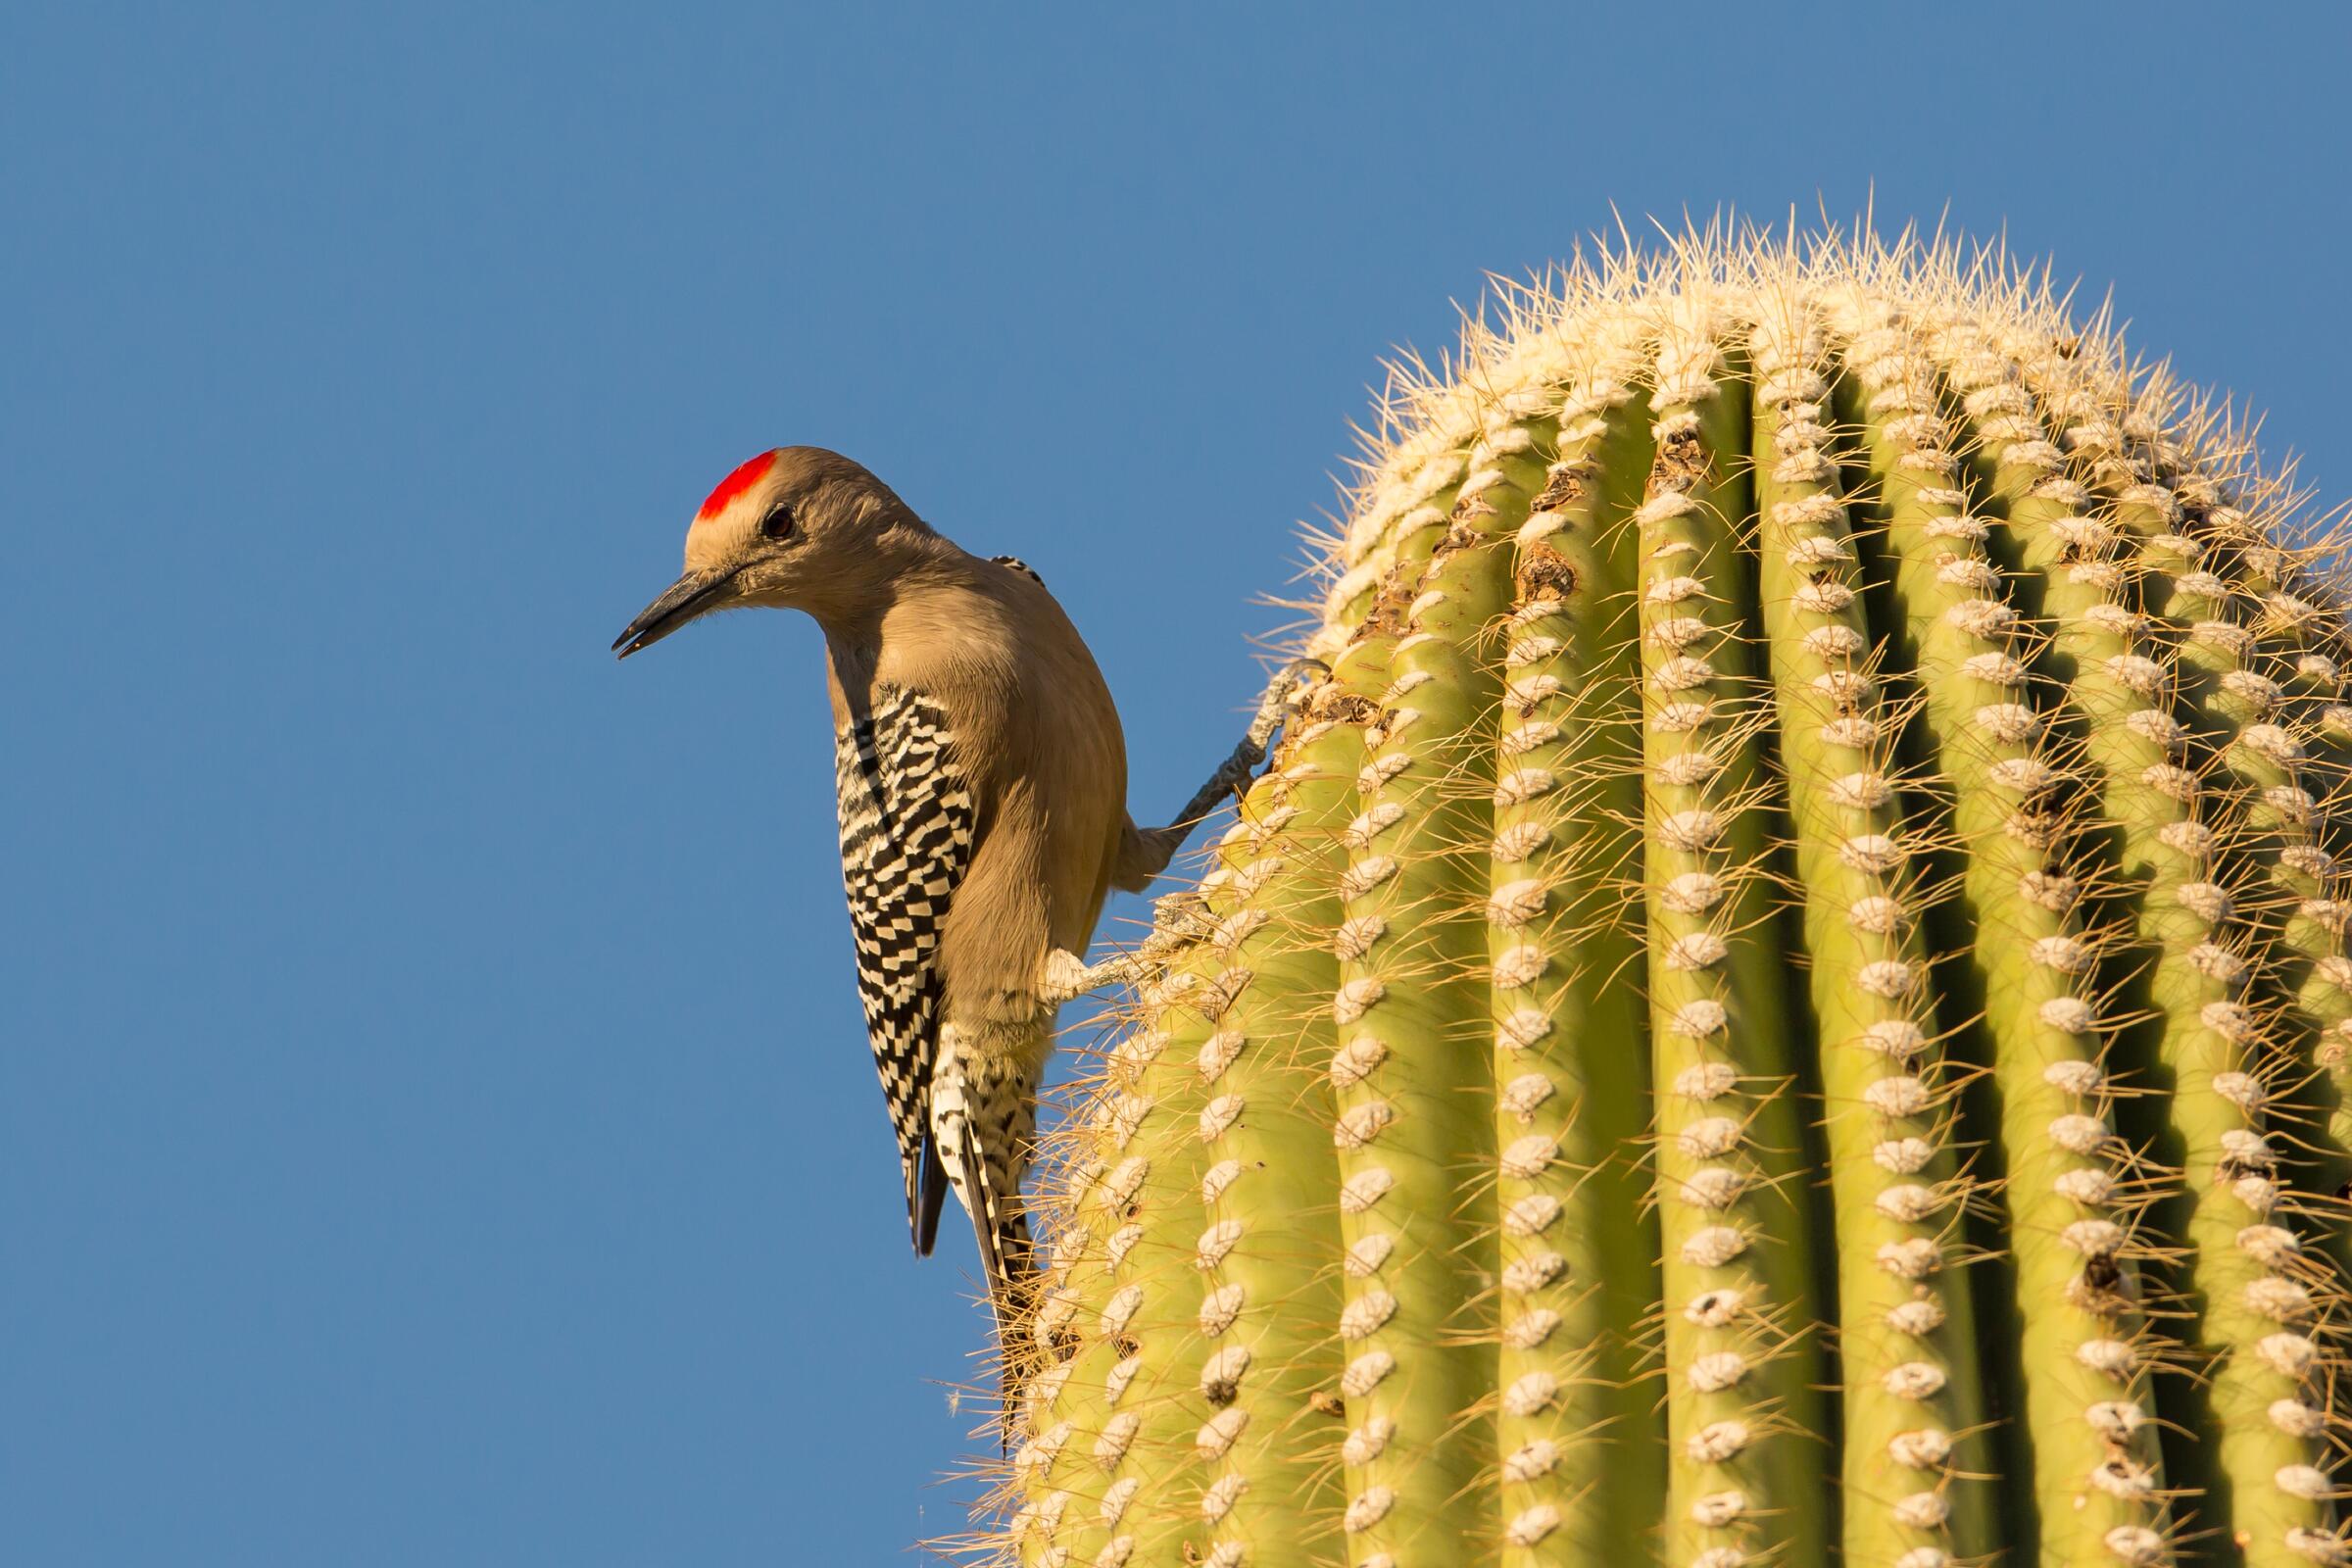 A Gila Woodpecker shows off its red cap from atop a Saguaro cactus against clear blue skies.